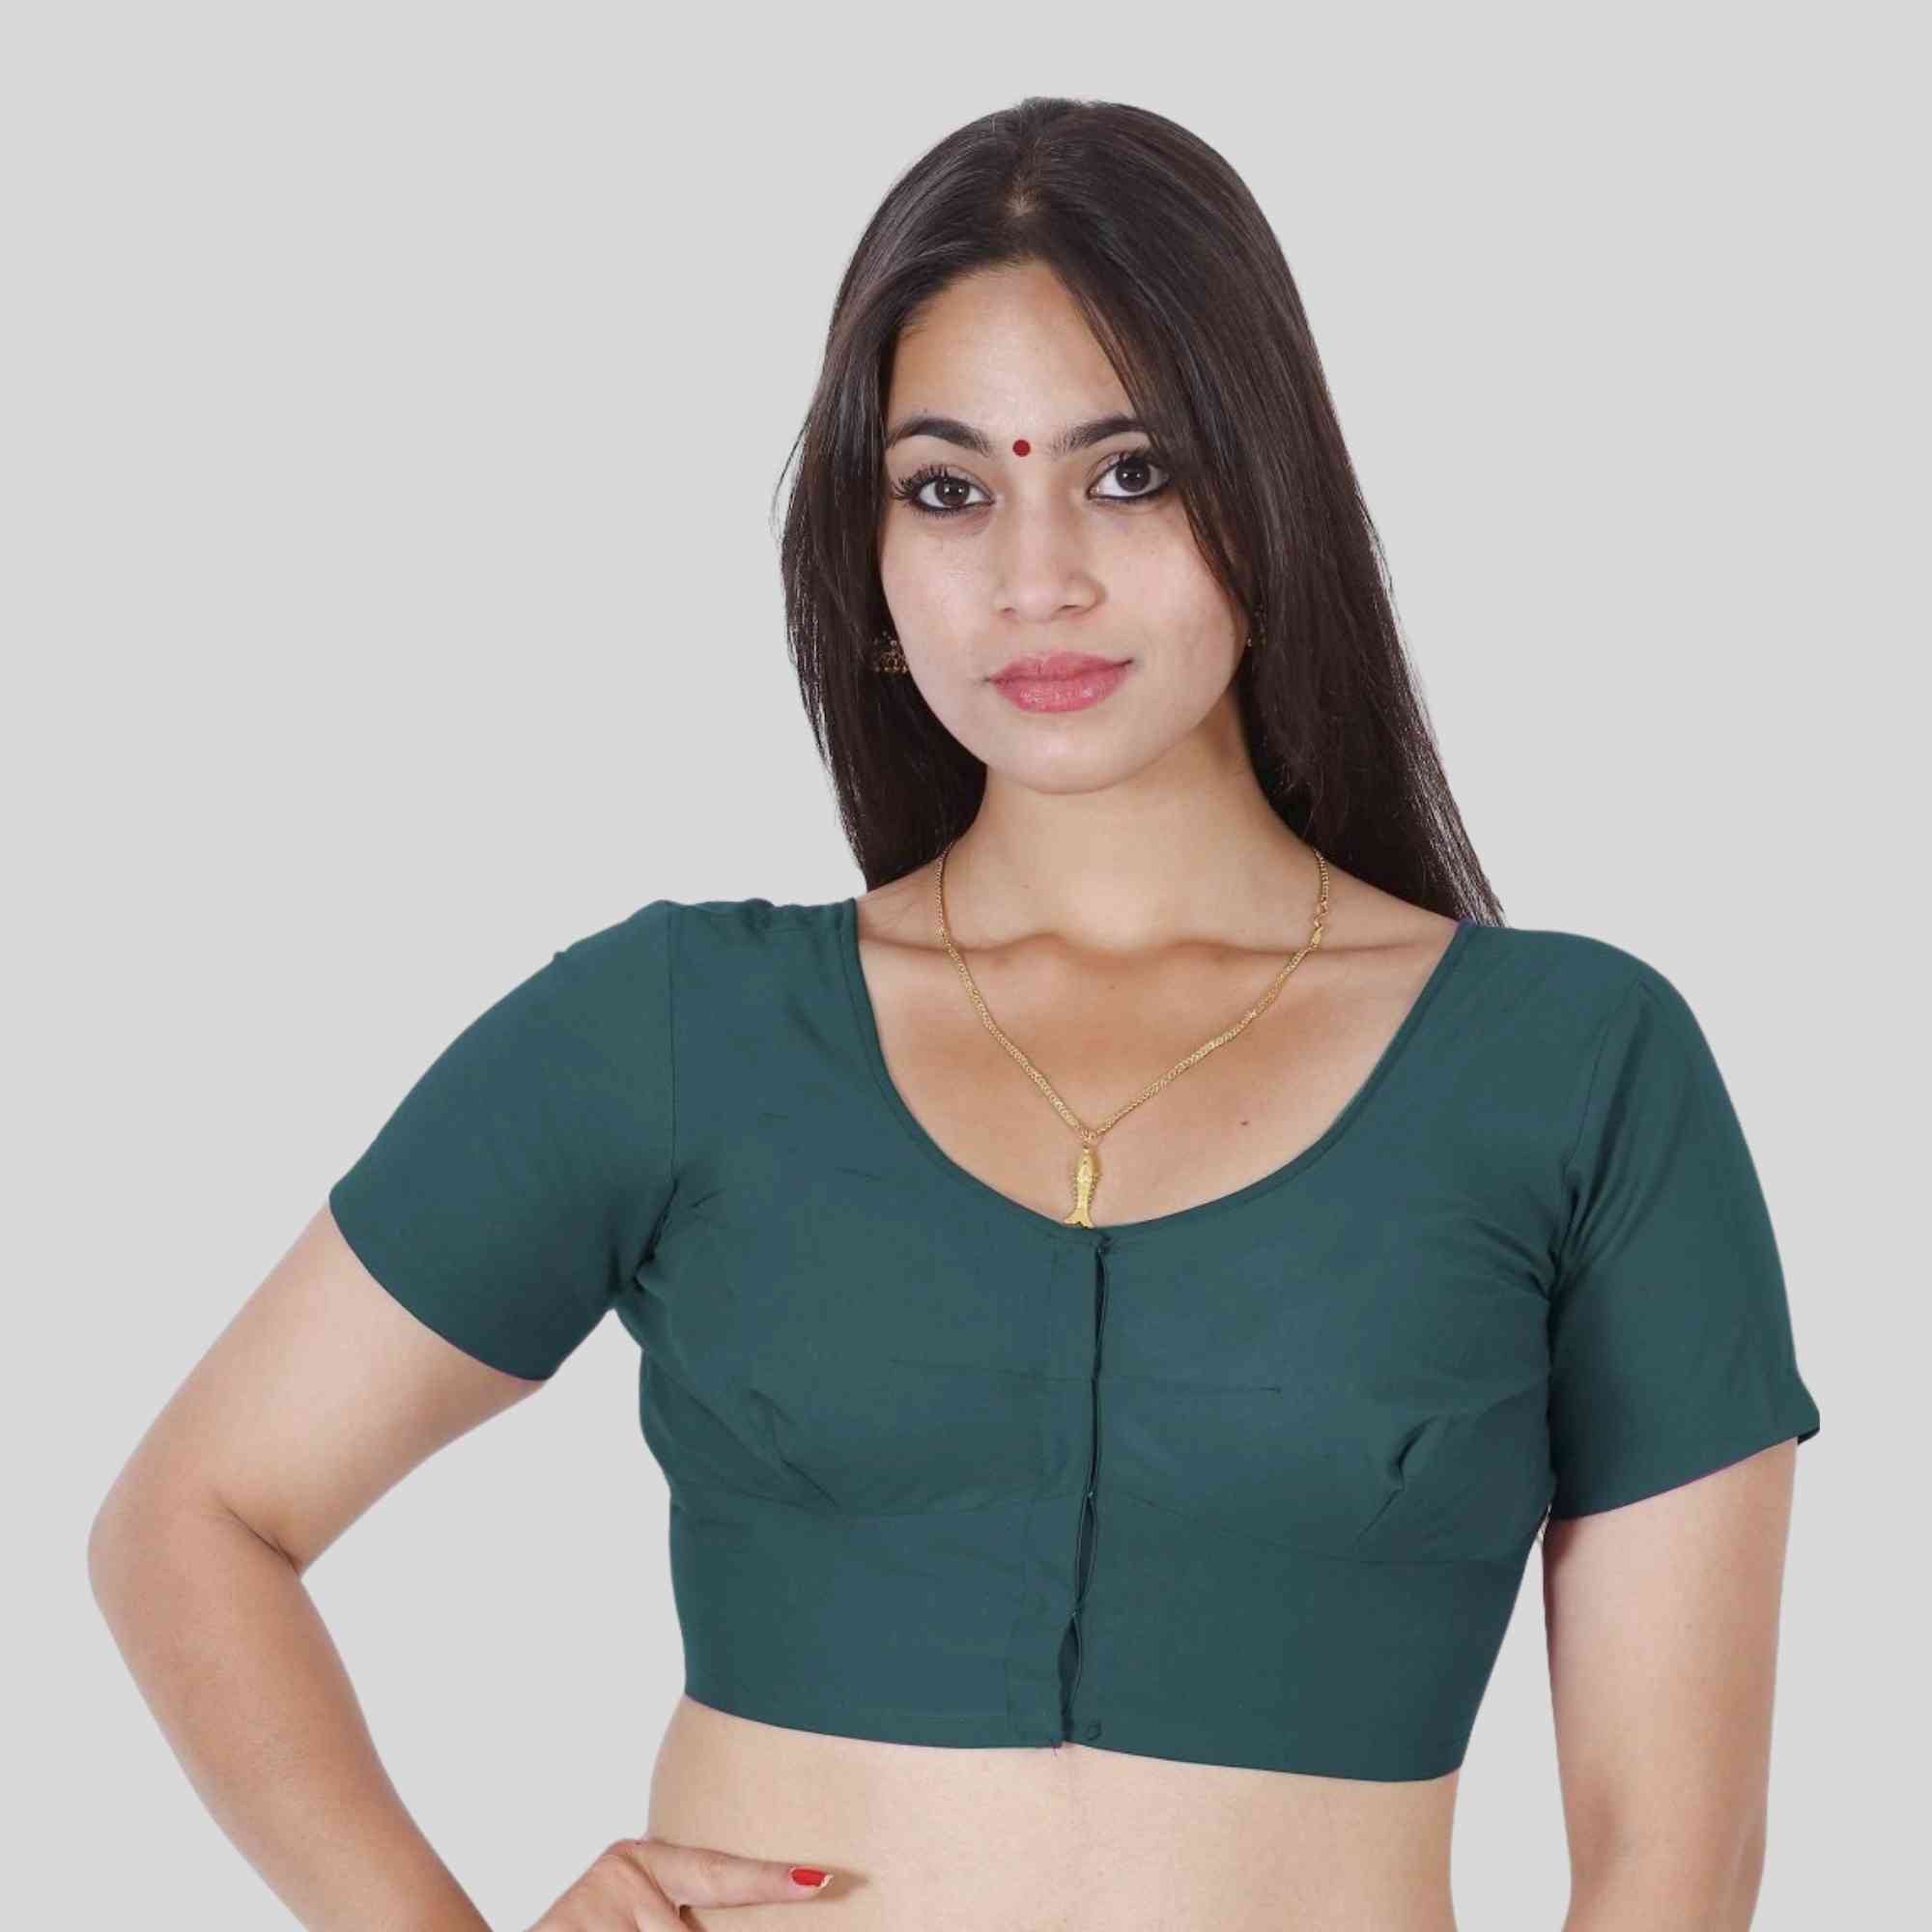 2 By 2 Peacock green blouse